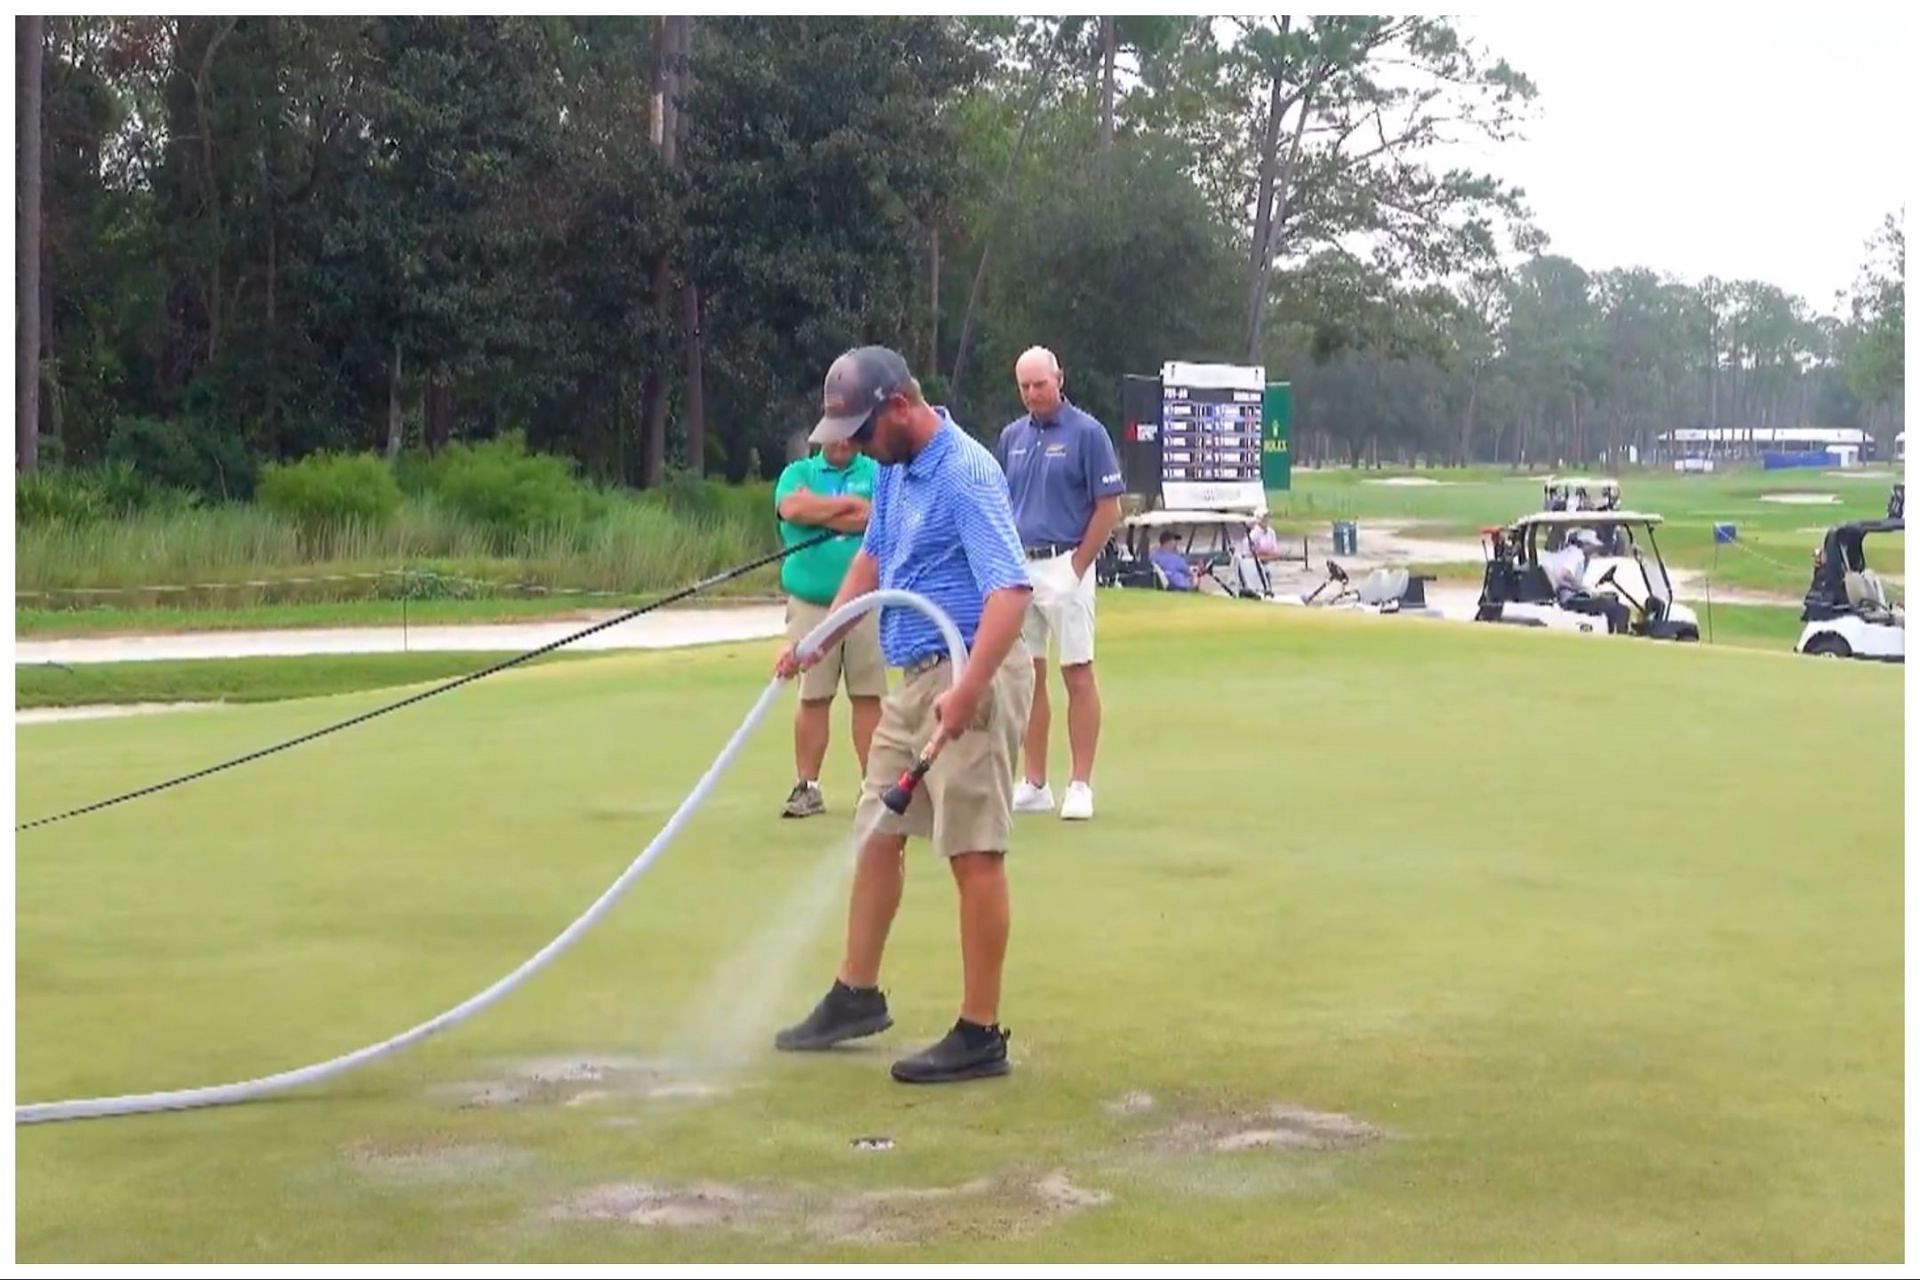 Four greens were damaged at Timuquana Country Club just few hours before the start of PGA Tour Champions event Constellation Furyk and Friends (Image vis